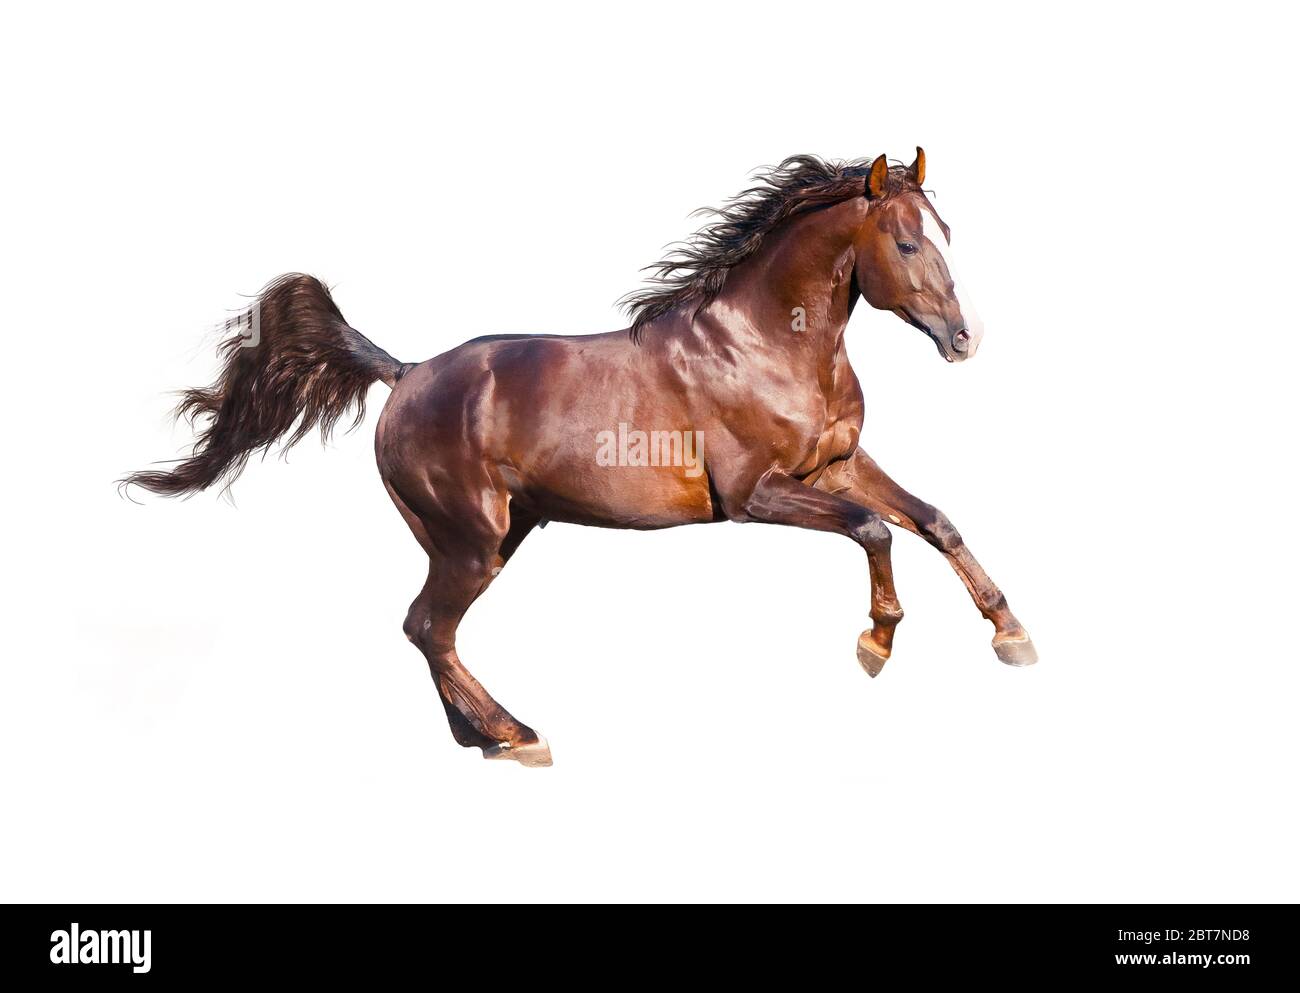 Chestnut young horse is galloping fast in the wild. Stock Photo